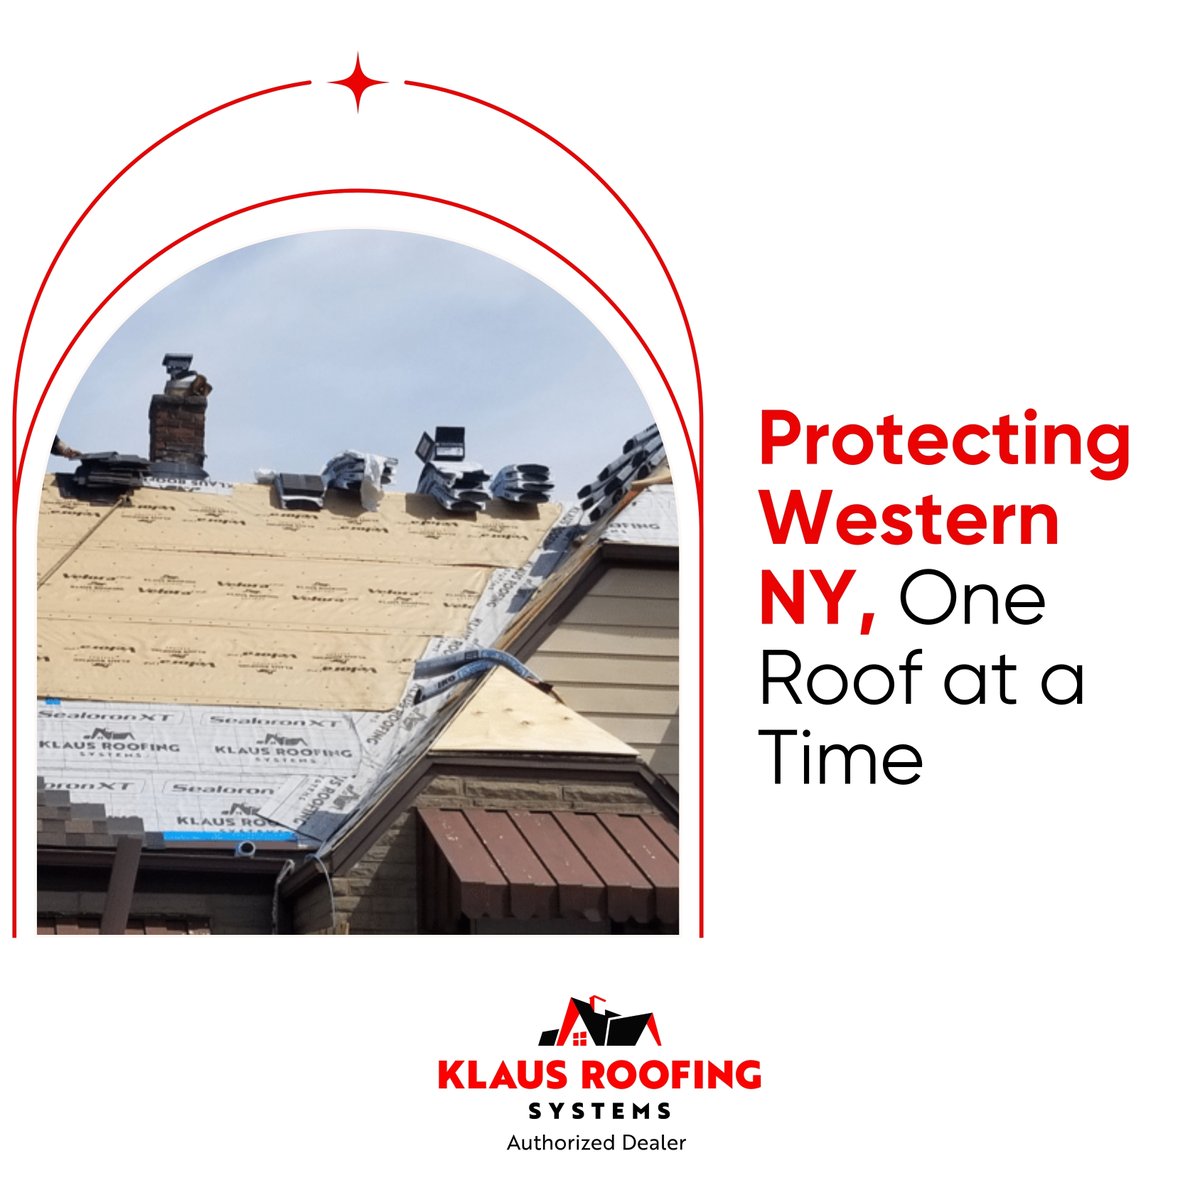 Western NY weather can be tough, but so are we! Klaus Roofing Systems of WNY is committed to protecting your home from the elements with our sturdy, weather-resistant roofing solutions.
--
🌐 krsofwny.com

#westernnyweather
#weatherresistant
#roofingsolutions